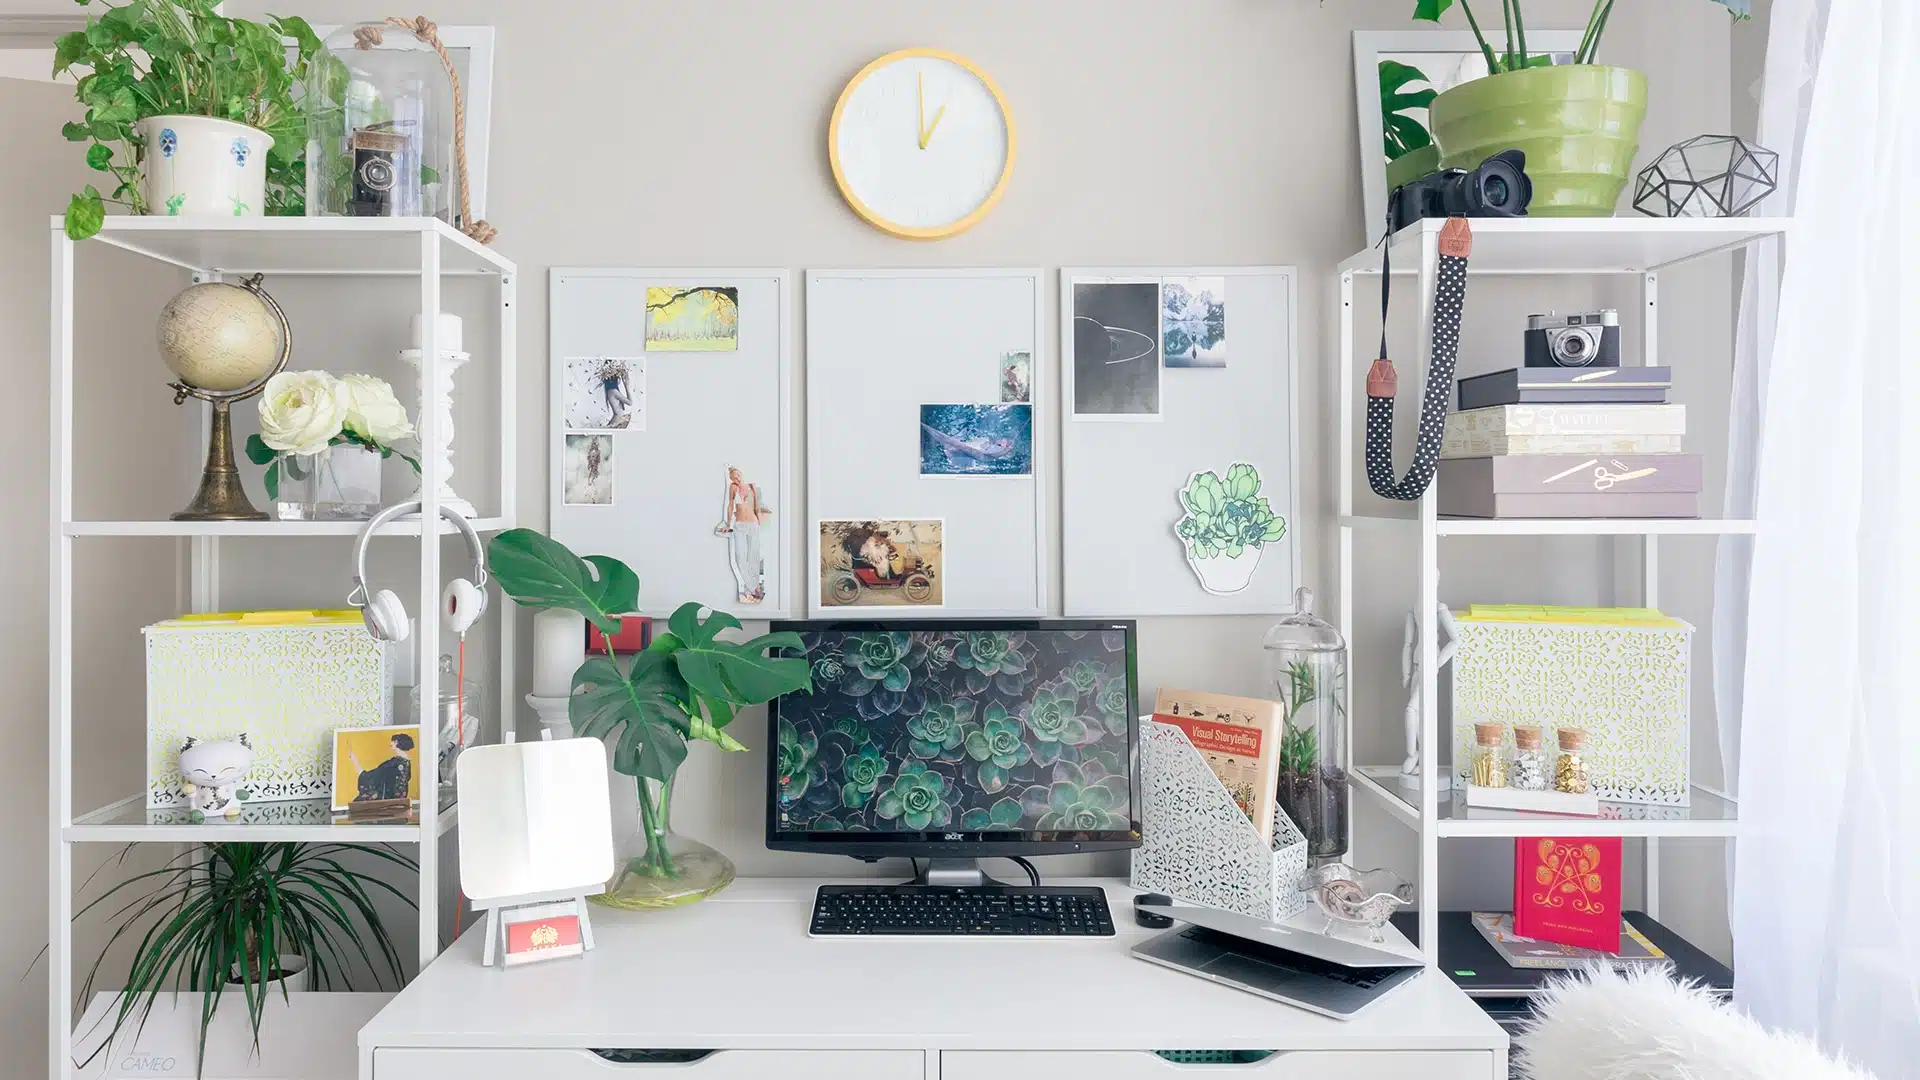 15 Best Eclectic Bohemian Office Decor Ideas to Revamp Your Workspace